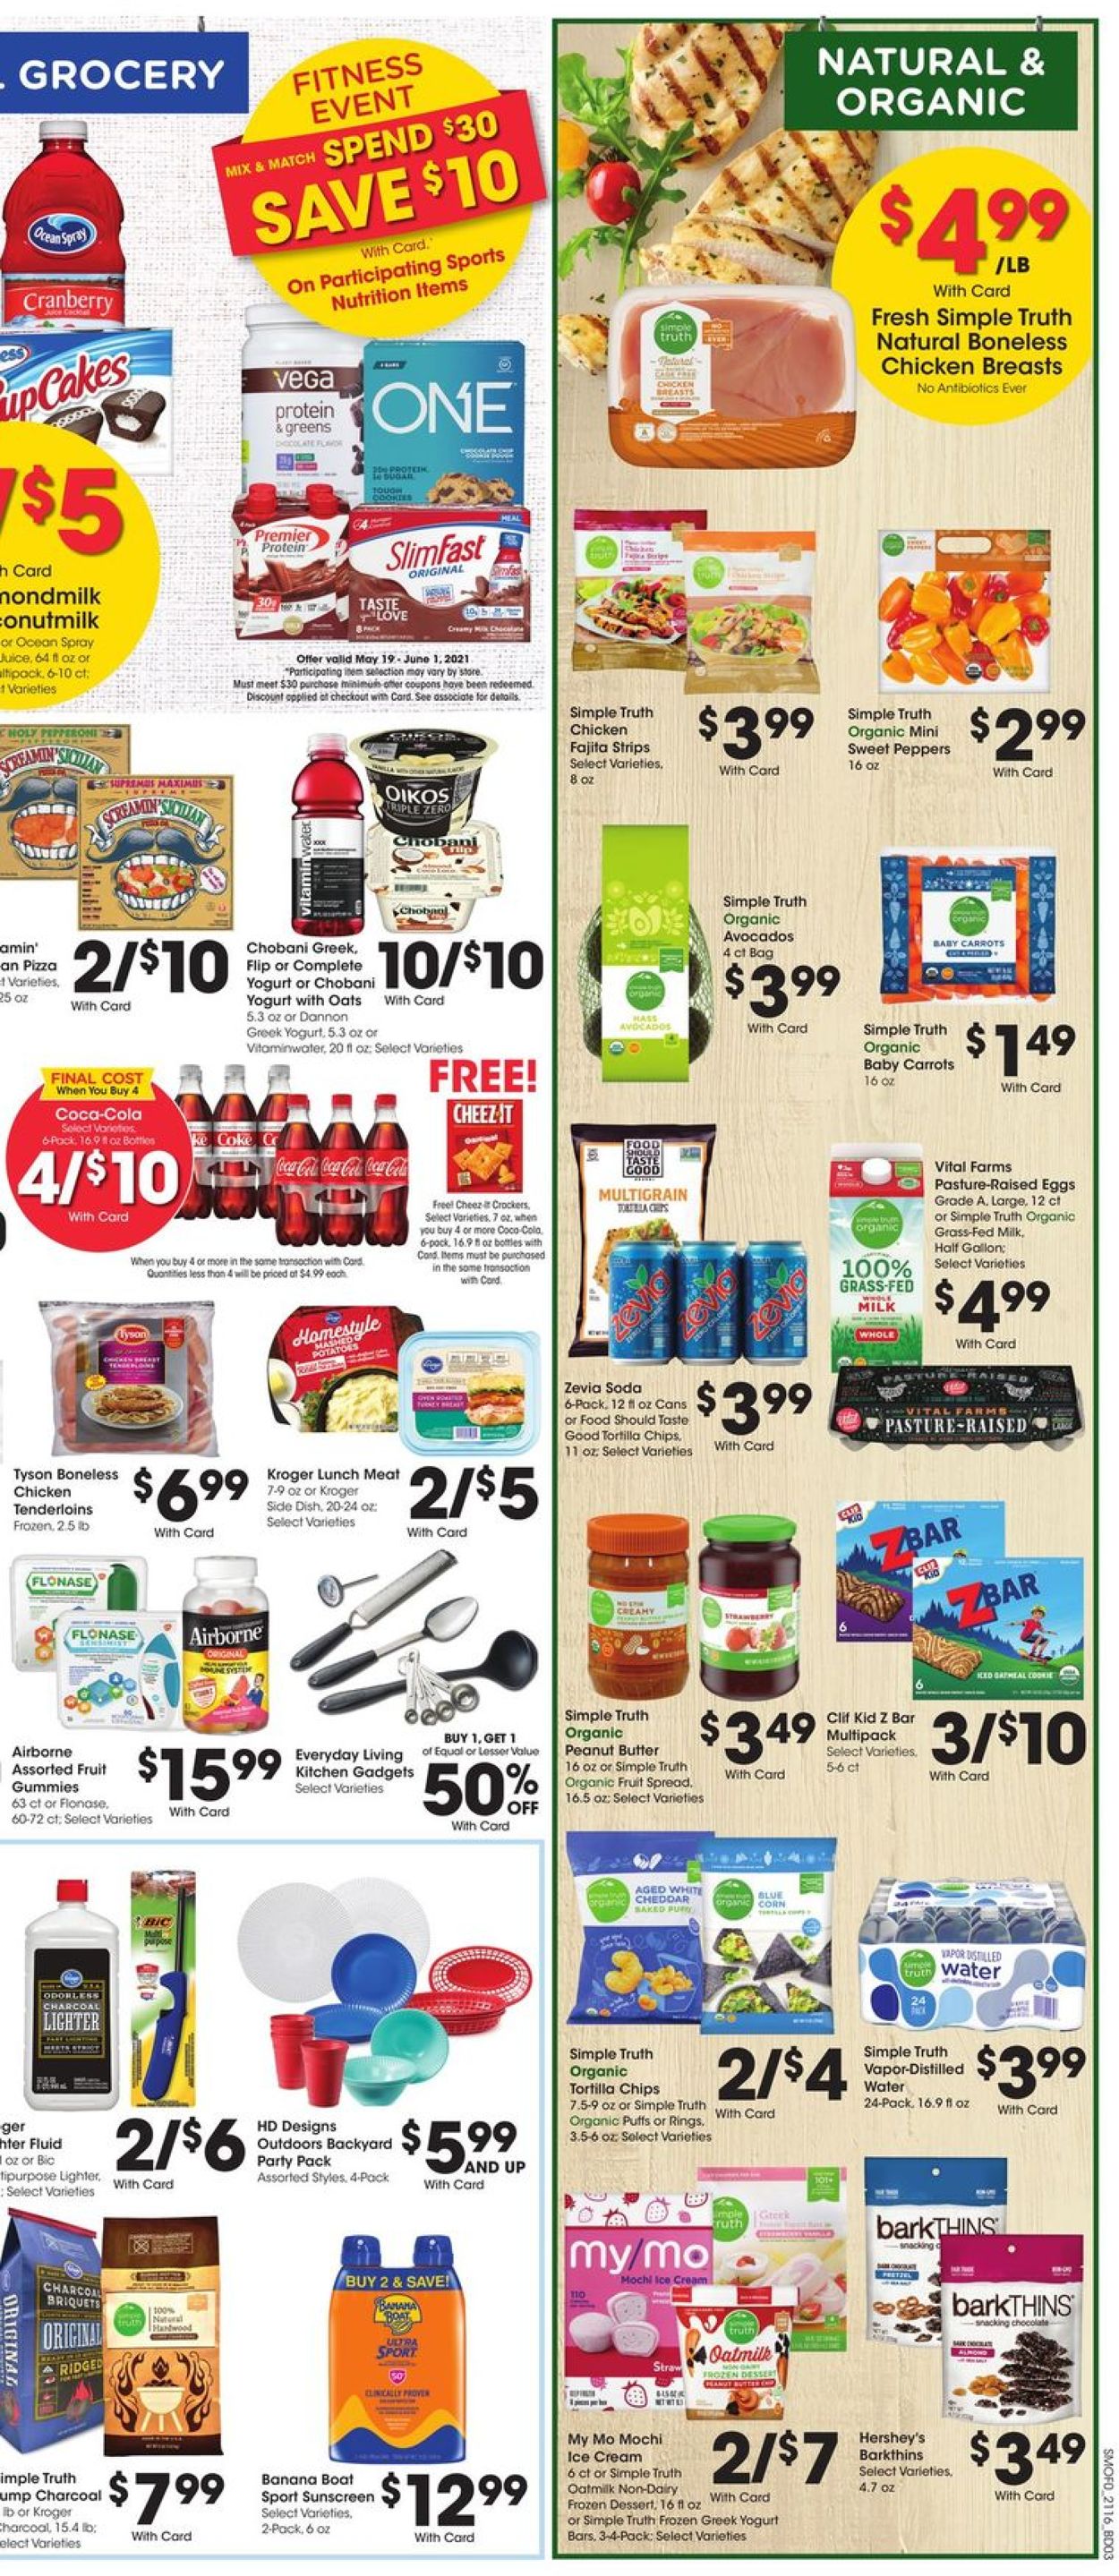 Smith's Current weekly ad 05/19 - 05/25/2021 [6] - frequent-ads.com